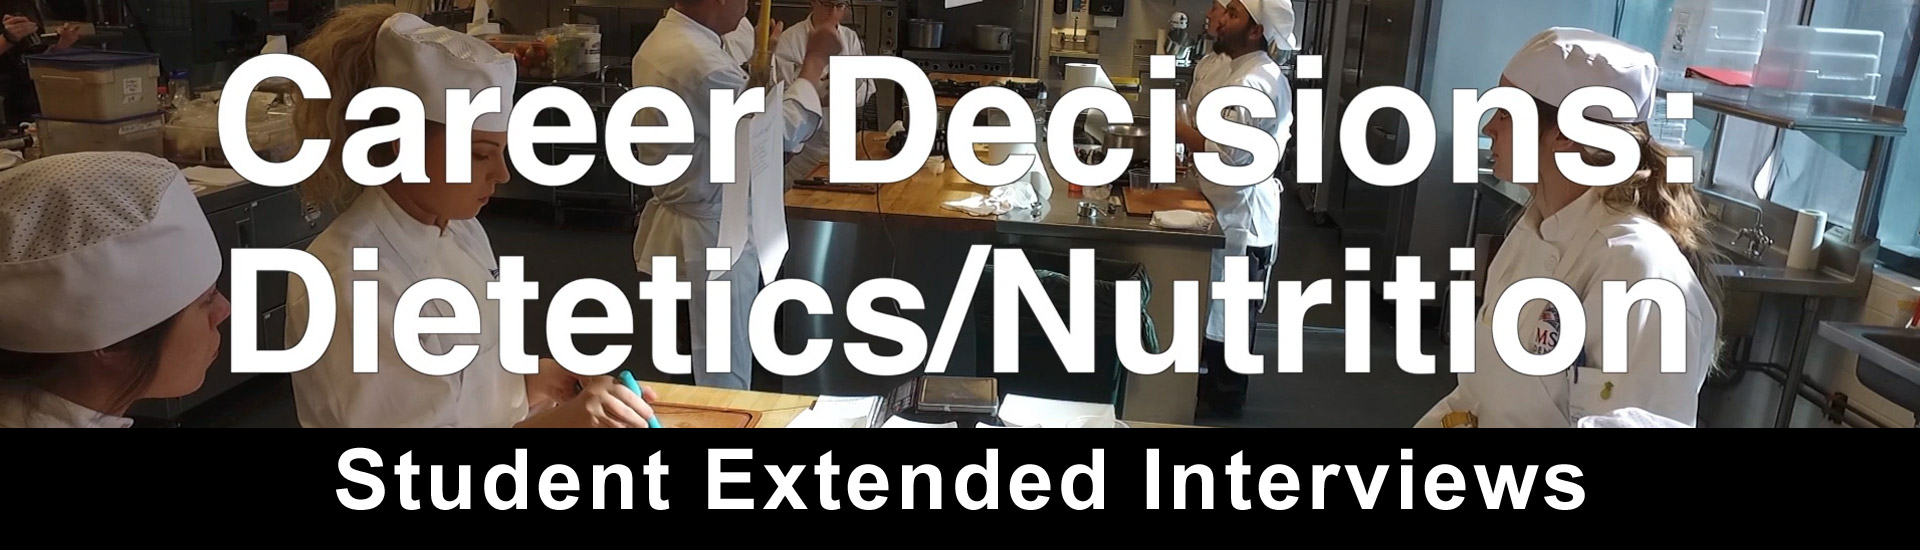 Career Decisions: Nutrition/Dietetics--Student Extended Interviews